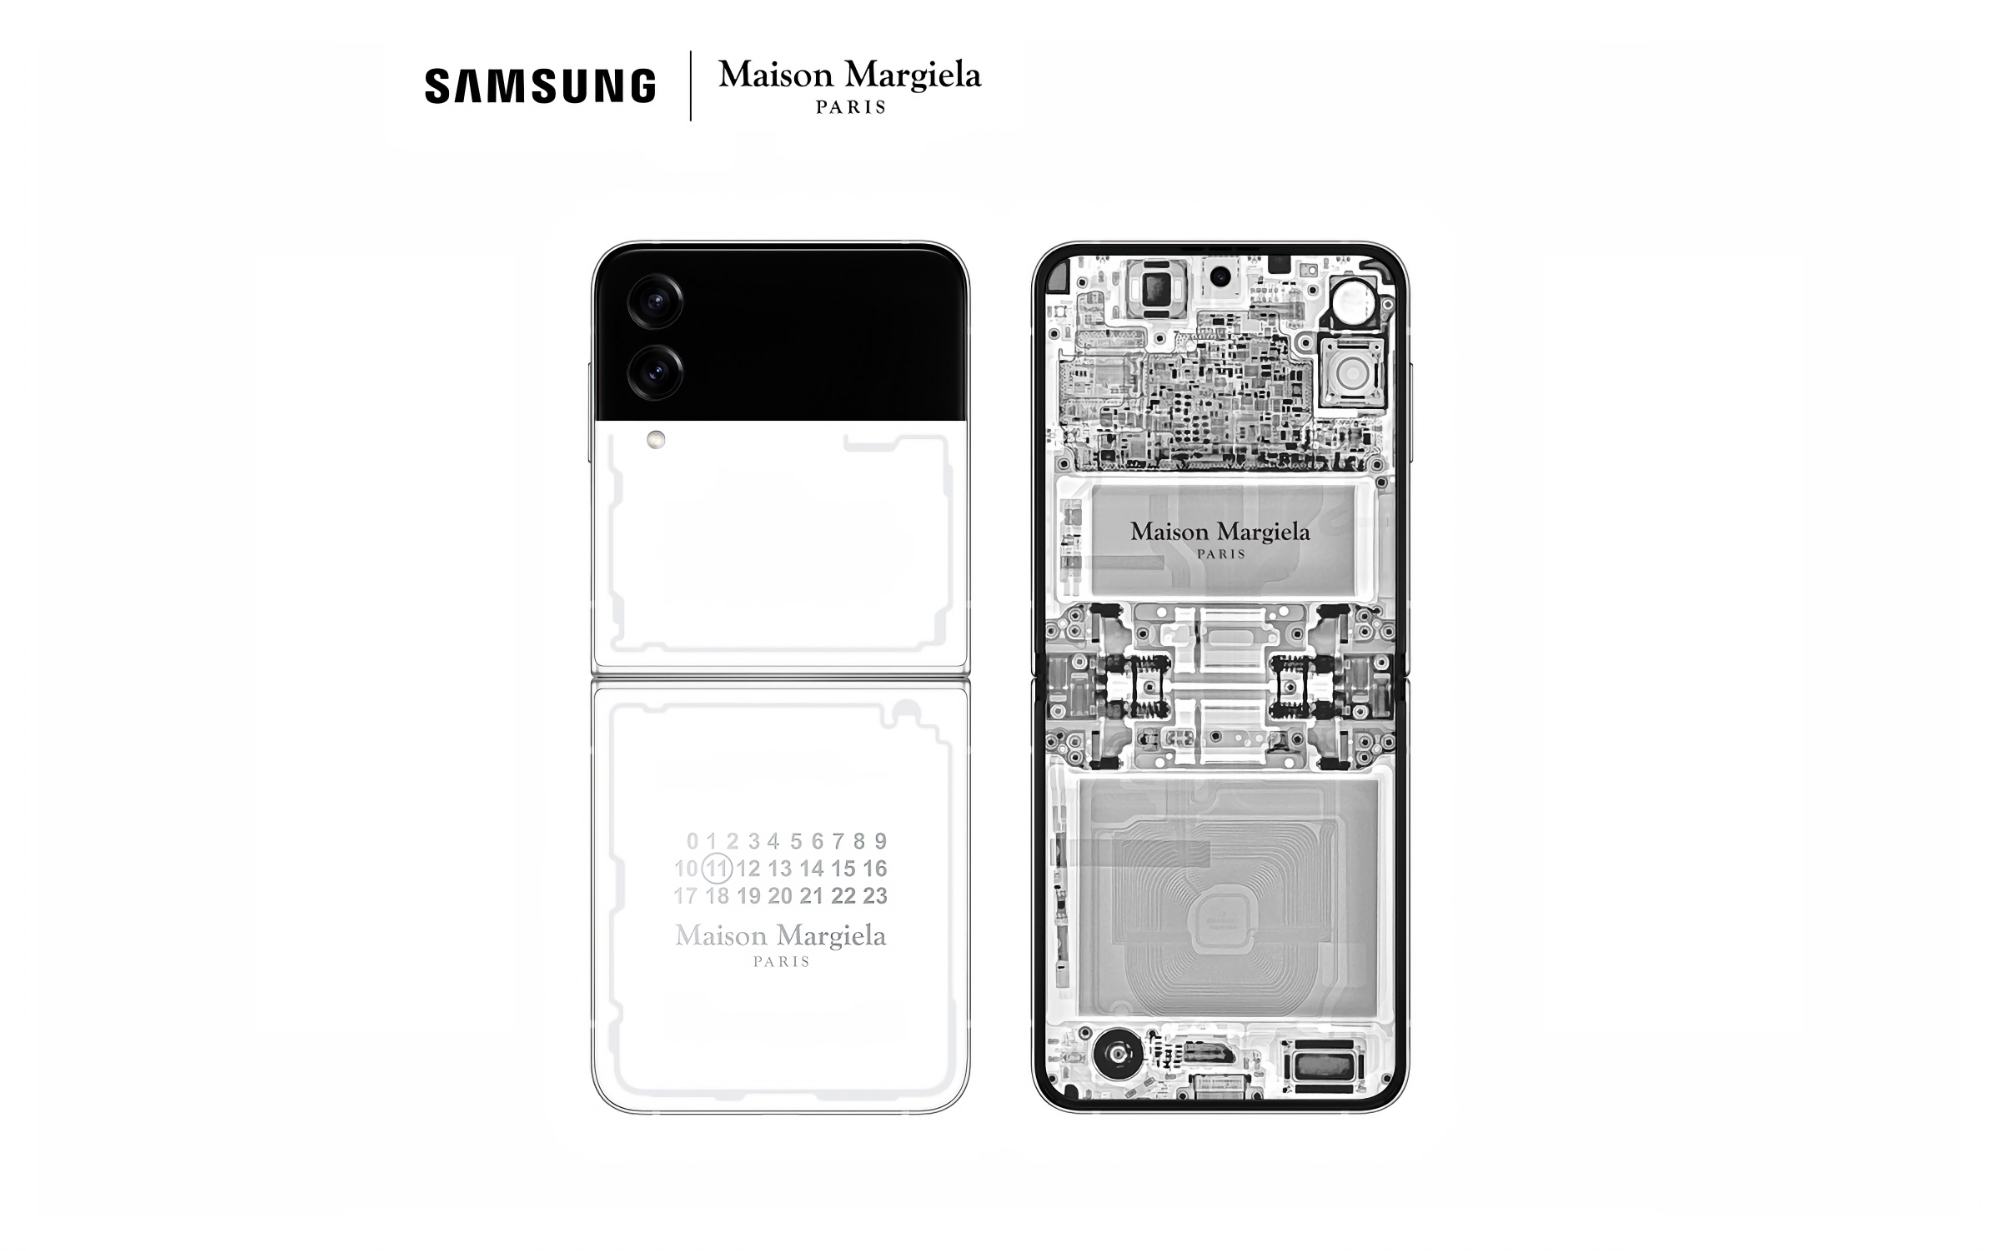 Samsung told how much the Galaxy Flip 4 Maison Margiela Edition clamshell will cost